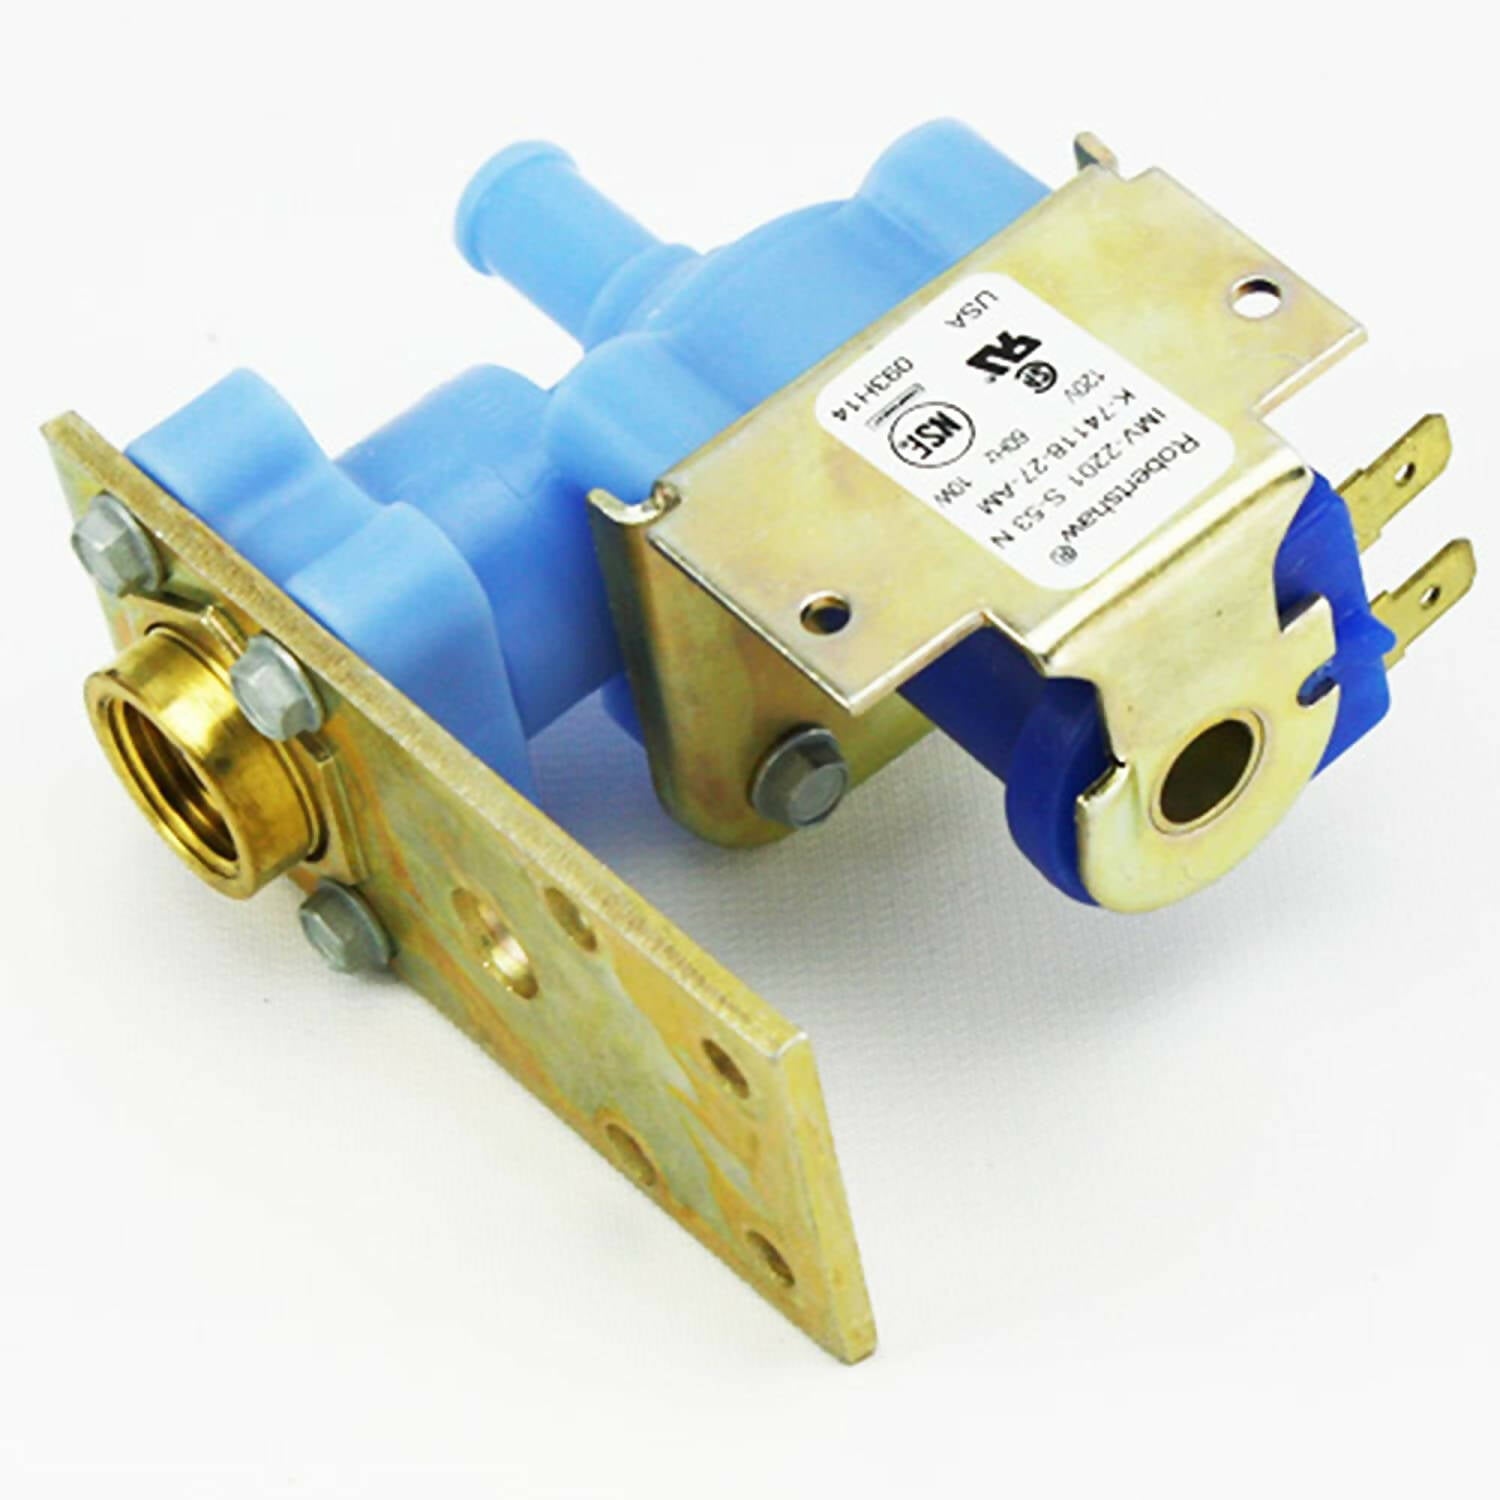 Robertshaw Commercial Ice Machine Water Inlet Valve - IMV-2201, Replaces: 12292201 662013220549 IMV2201 K-74118-27 S-53 OEM PARTS WORLD